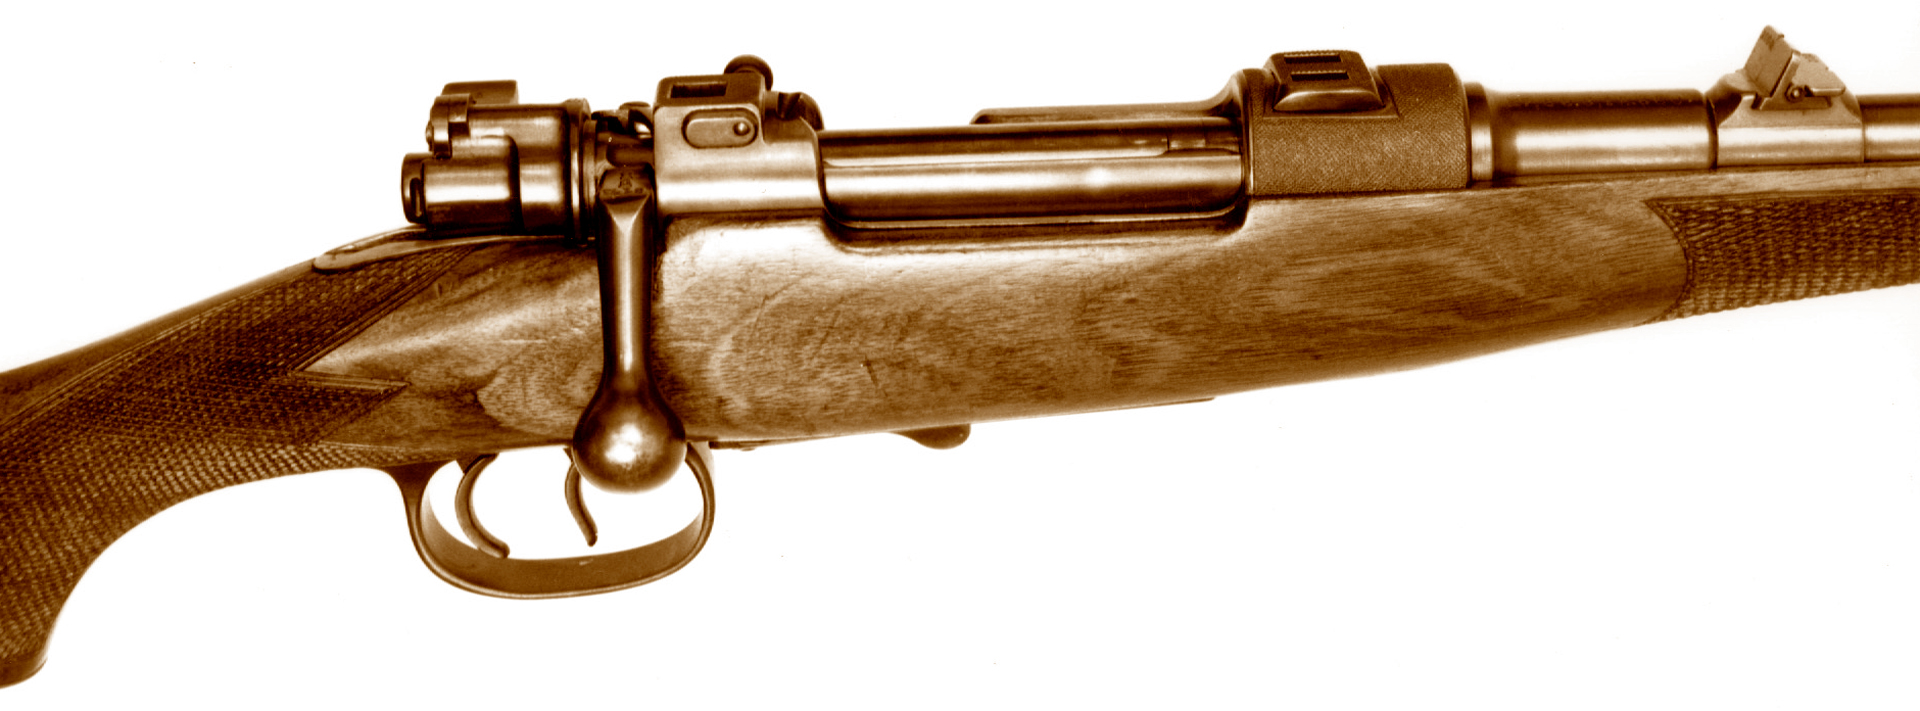 The Original Mauser 98 Sporters | An Official Journal Of The NRA